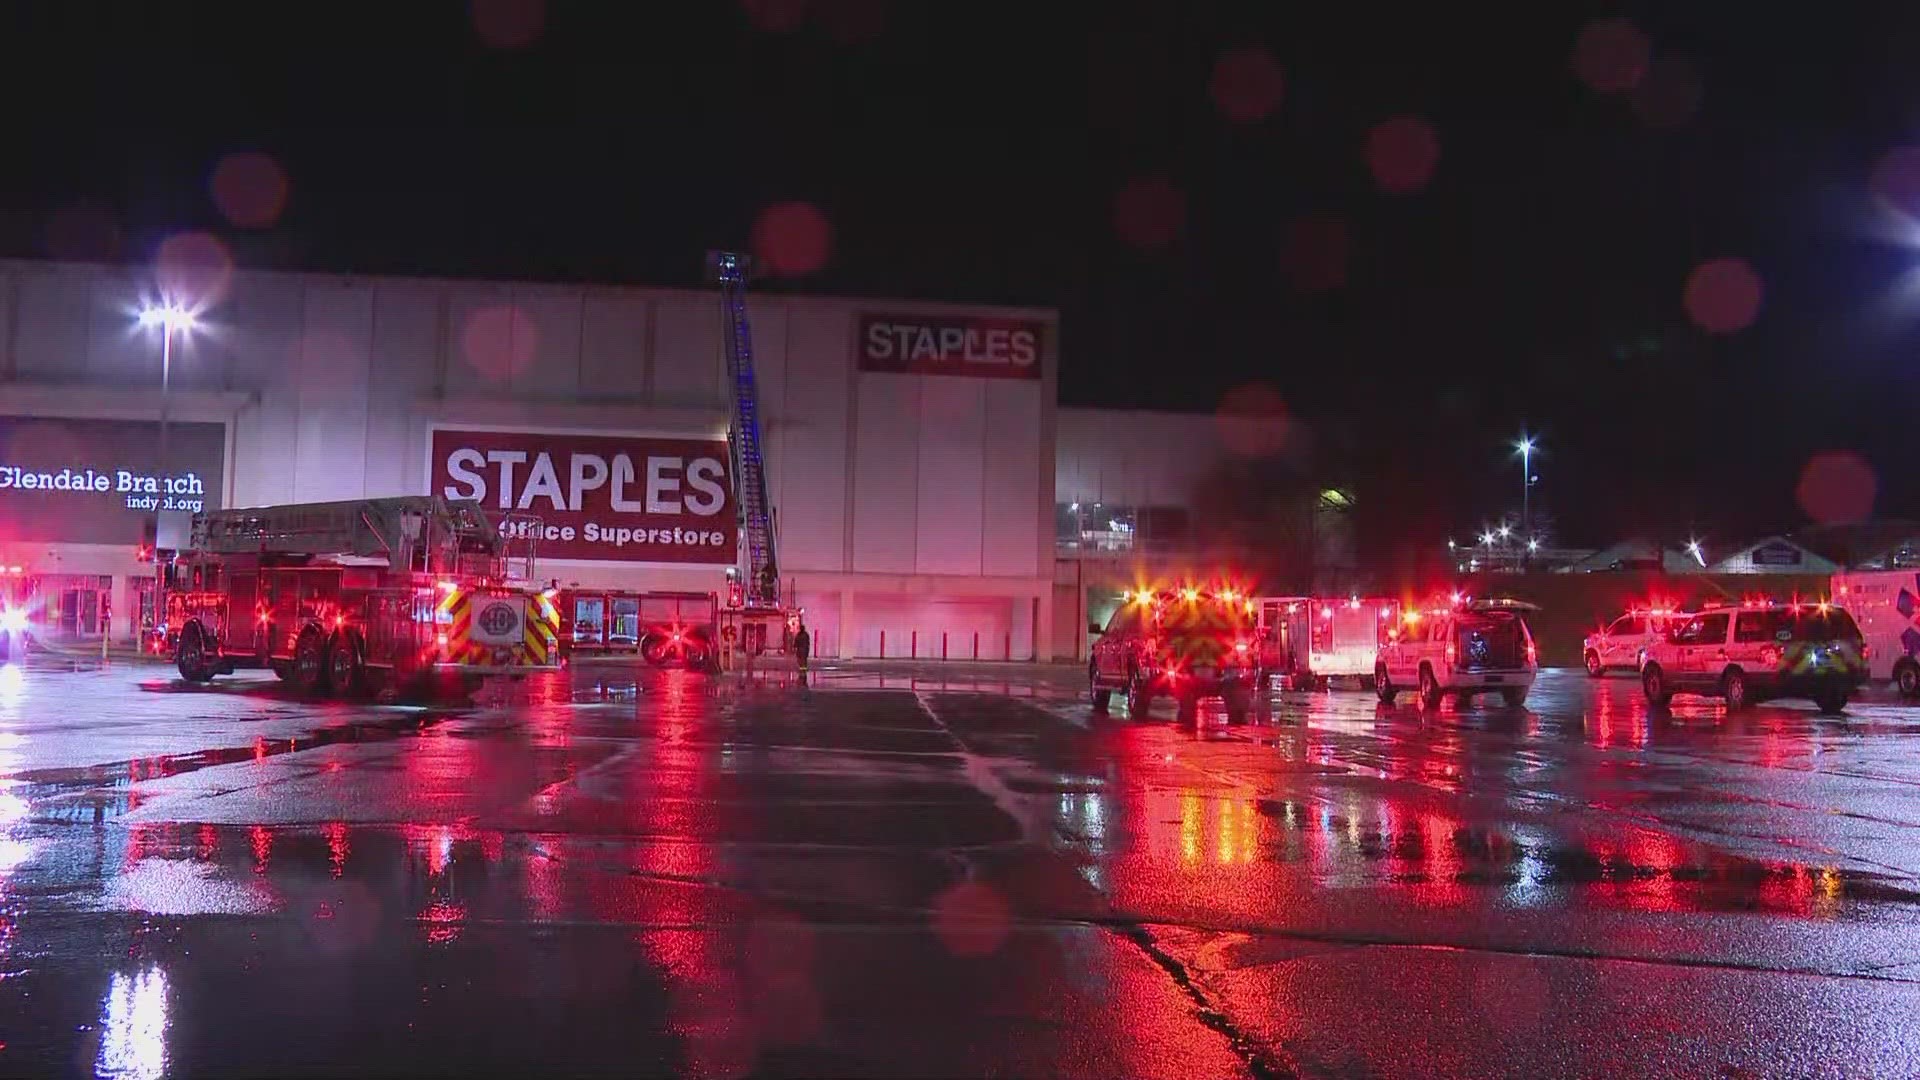 IFD says the fire started in the back stairwell that connects the public library, Target and Staples.